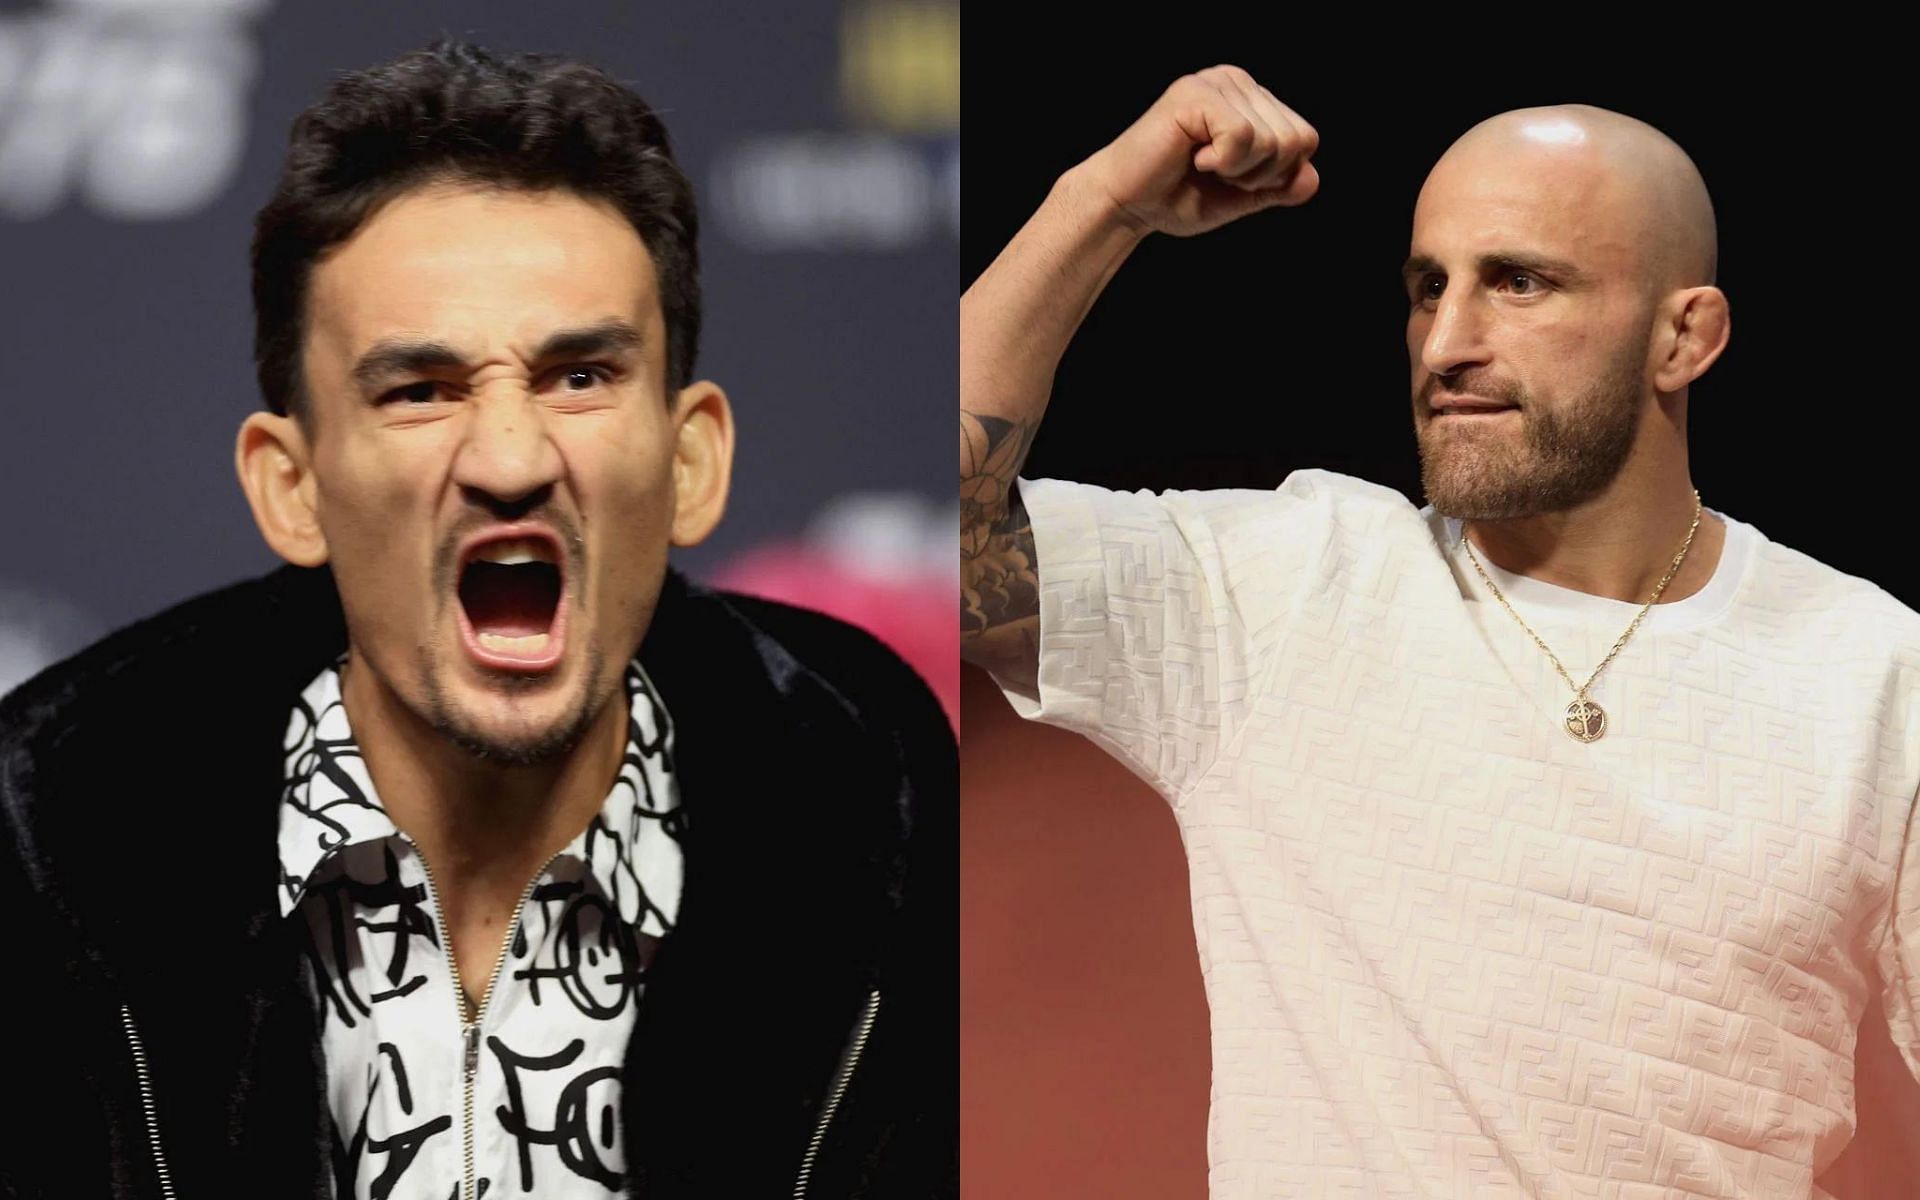 Max Holloway (left) and Alexander Volkanovski (right) [Images courtesy of Getty]